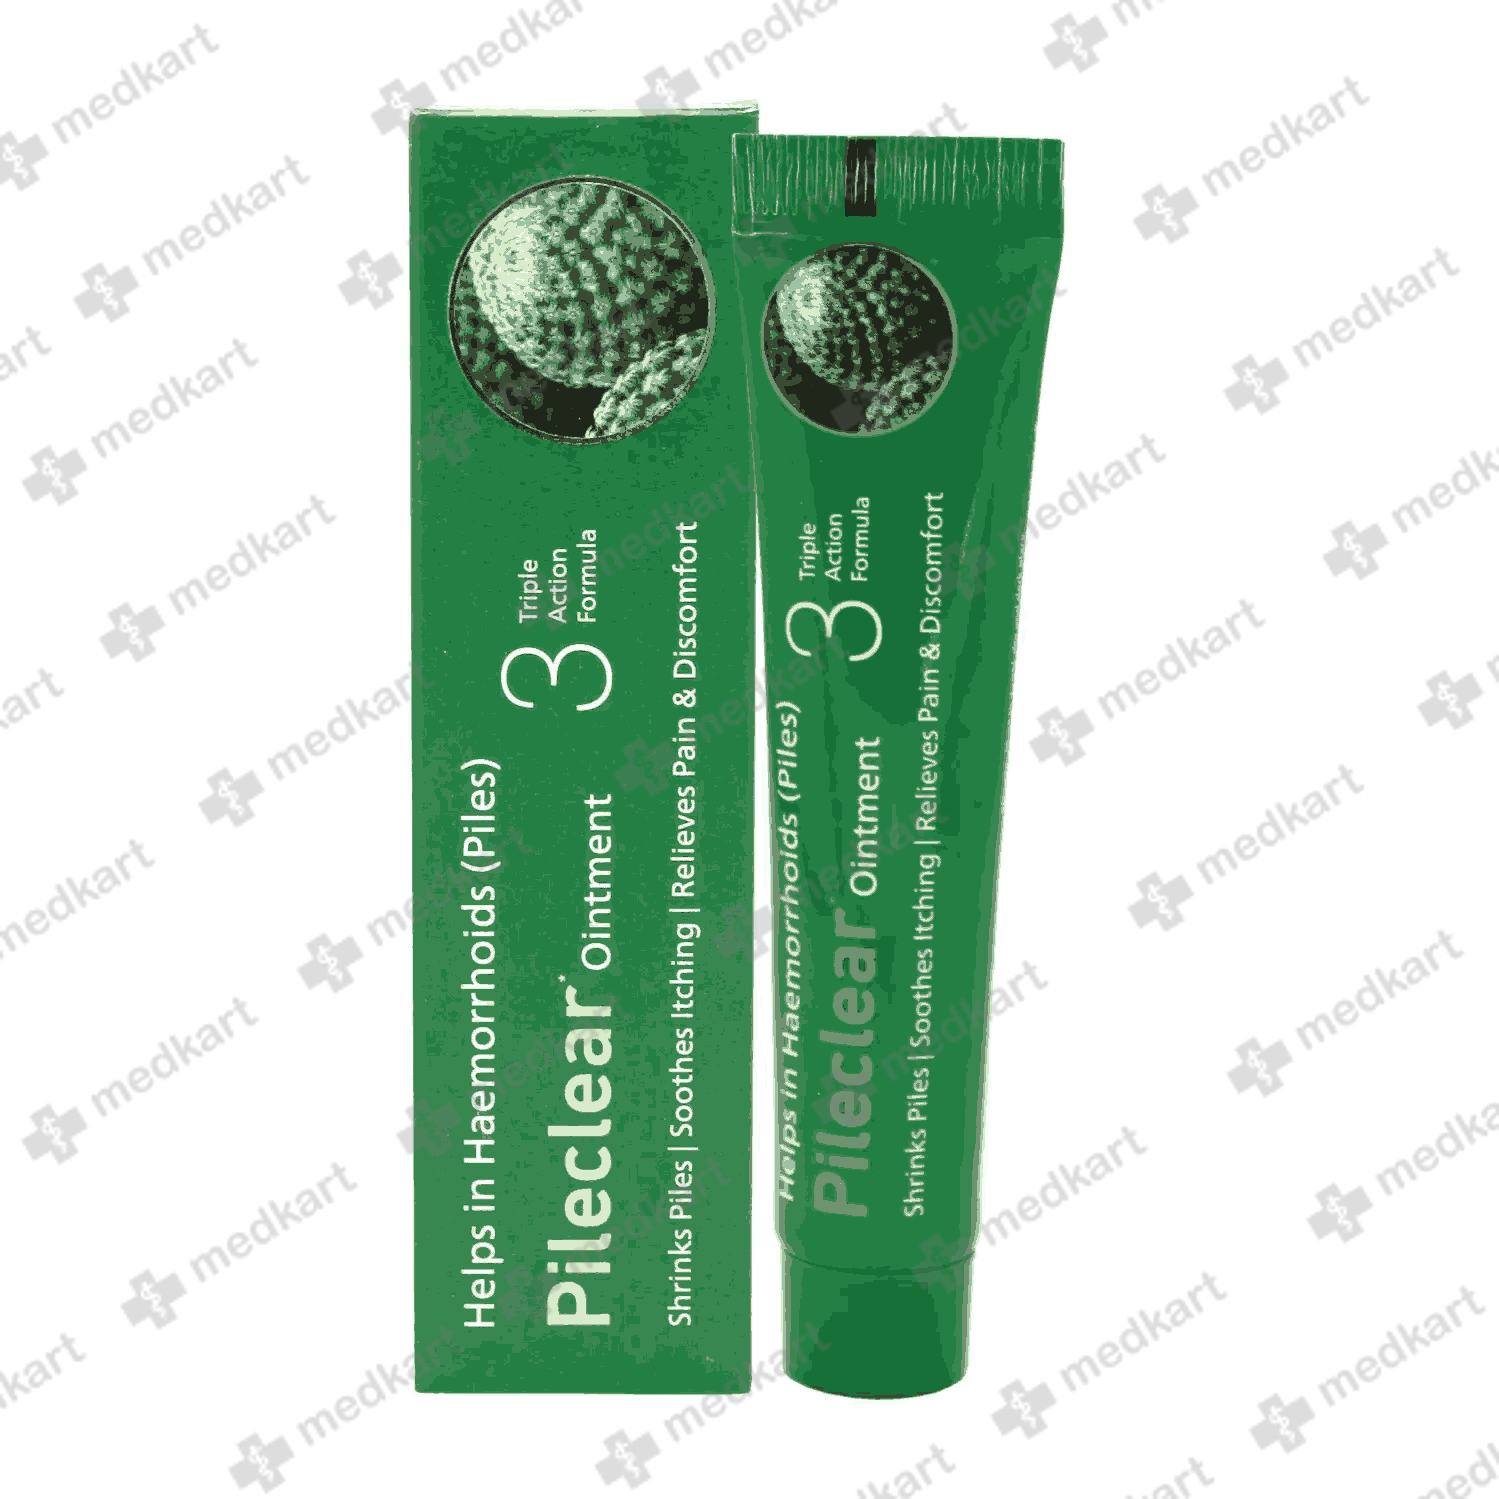 pileclear-ointment-30-gm